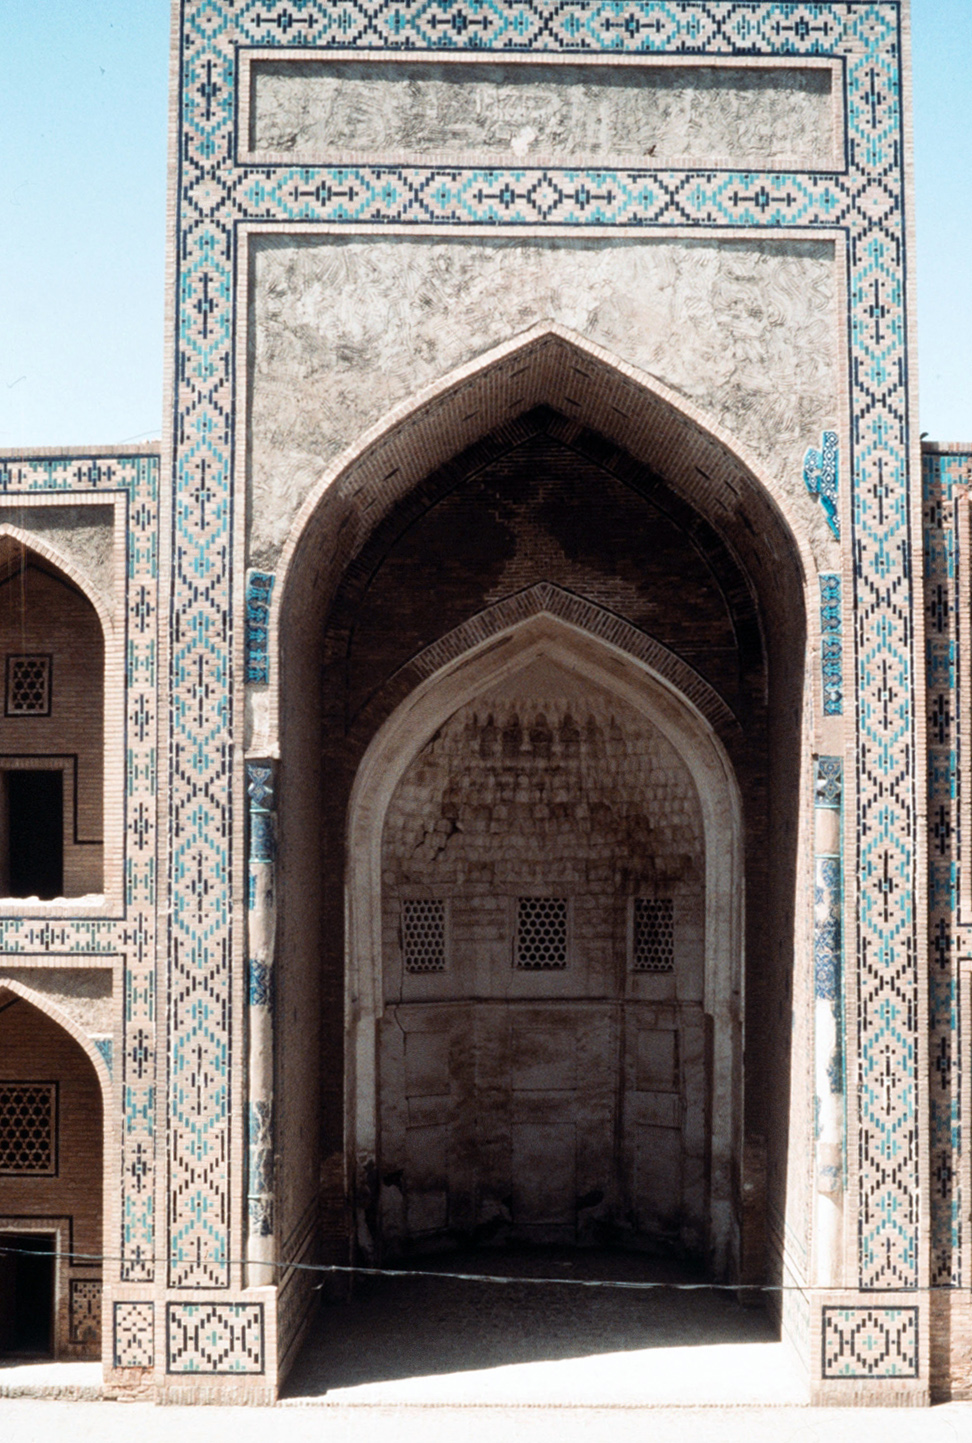 View of mihrab from courtyard